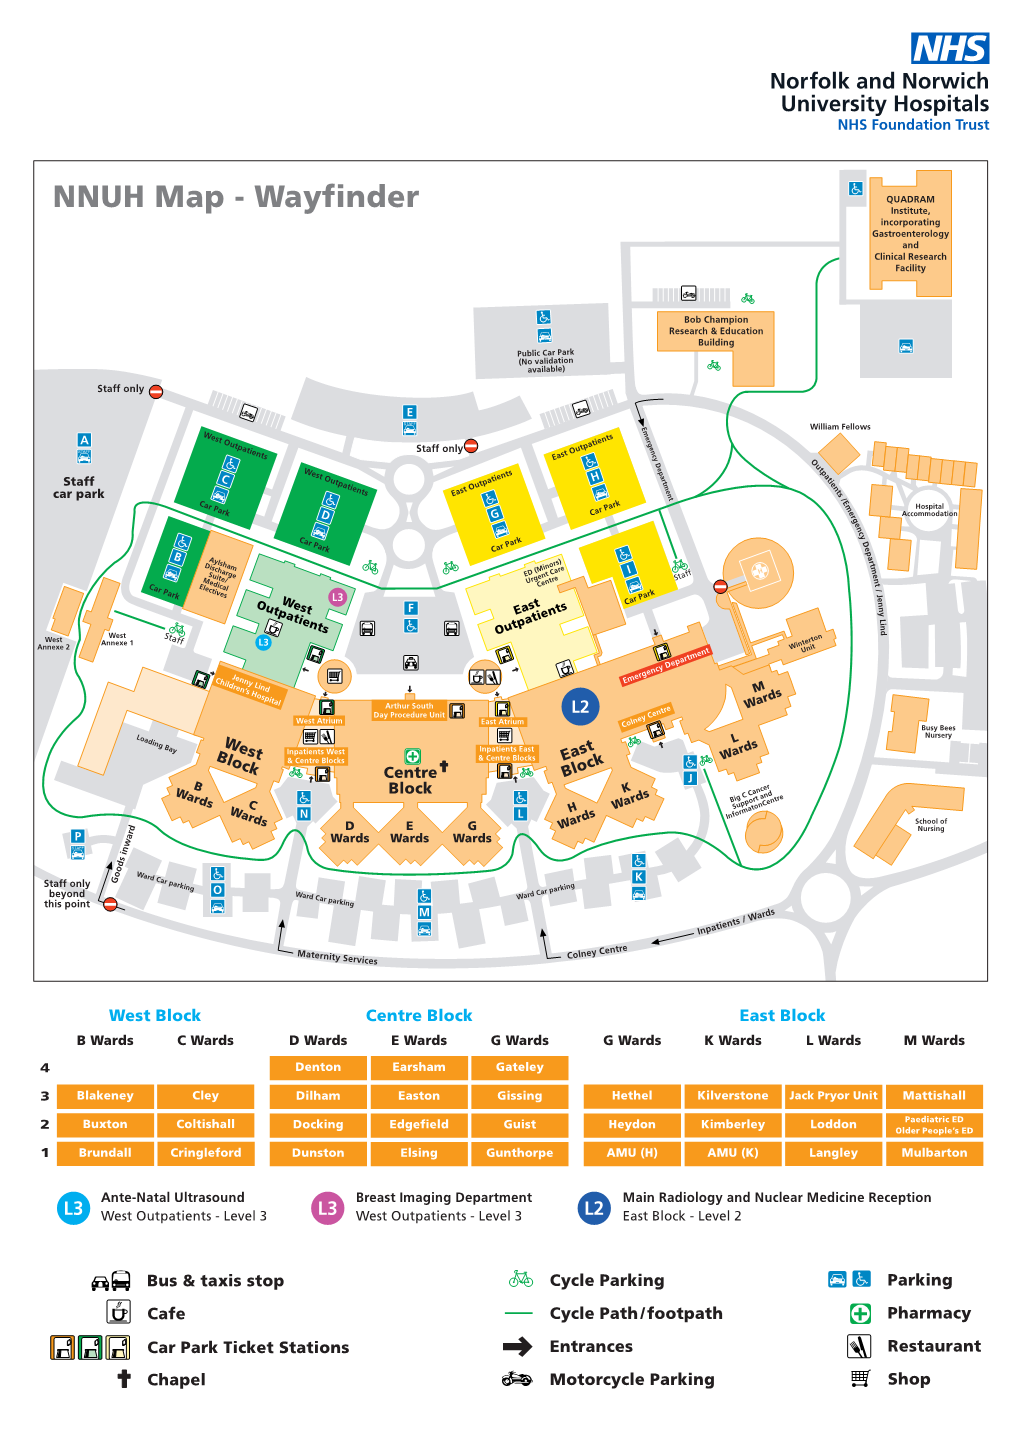 NNUH Map - Wayfinder Institute, Incorporating Gastroenterology and Clinical Research Facility